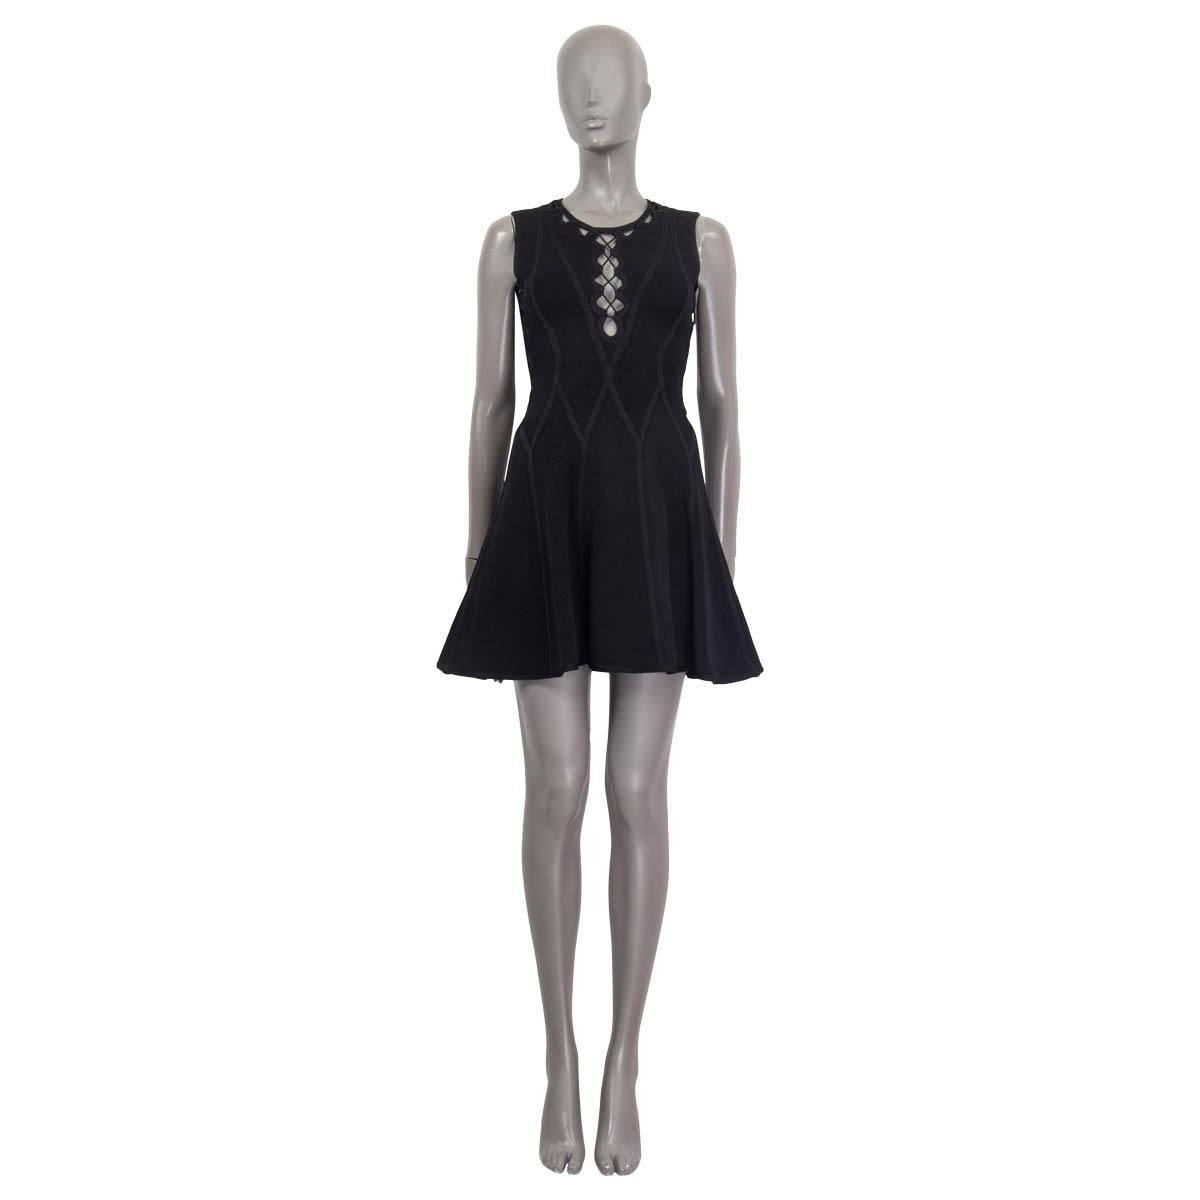 100% authentic Herve Leger flared dress in black rayon (90%), nylon (9%) and spandex (1%). Features cut out details at the sides and the neck. Opens with a zipper and a hook at the back. Unlined. Has been worn and is in excellent condition.